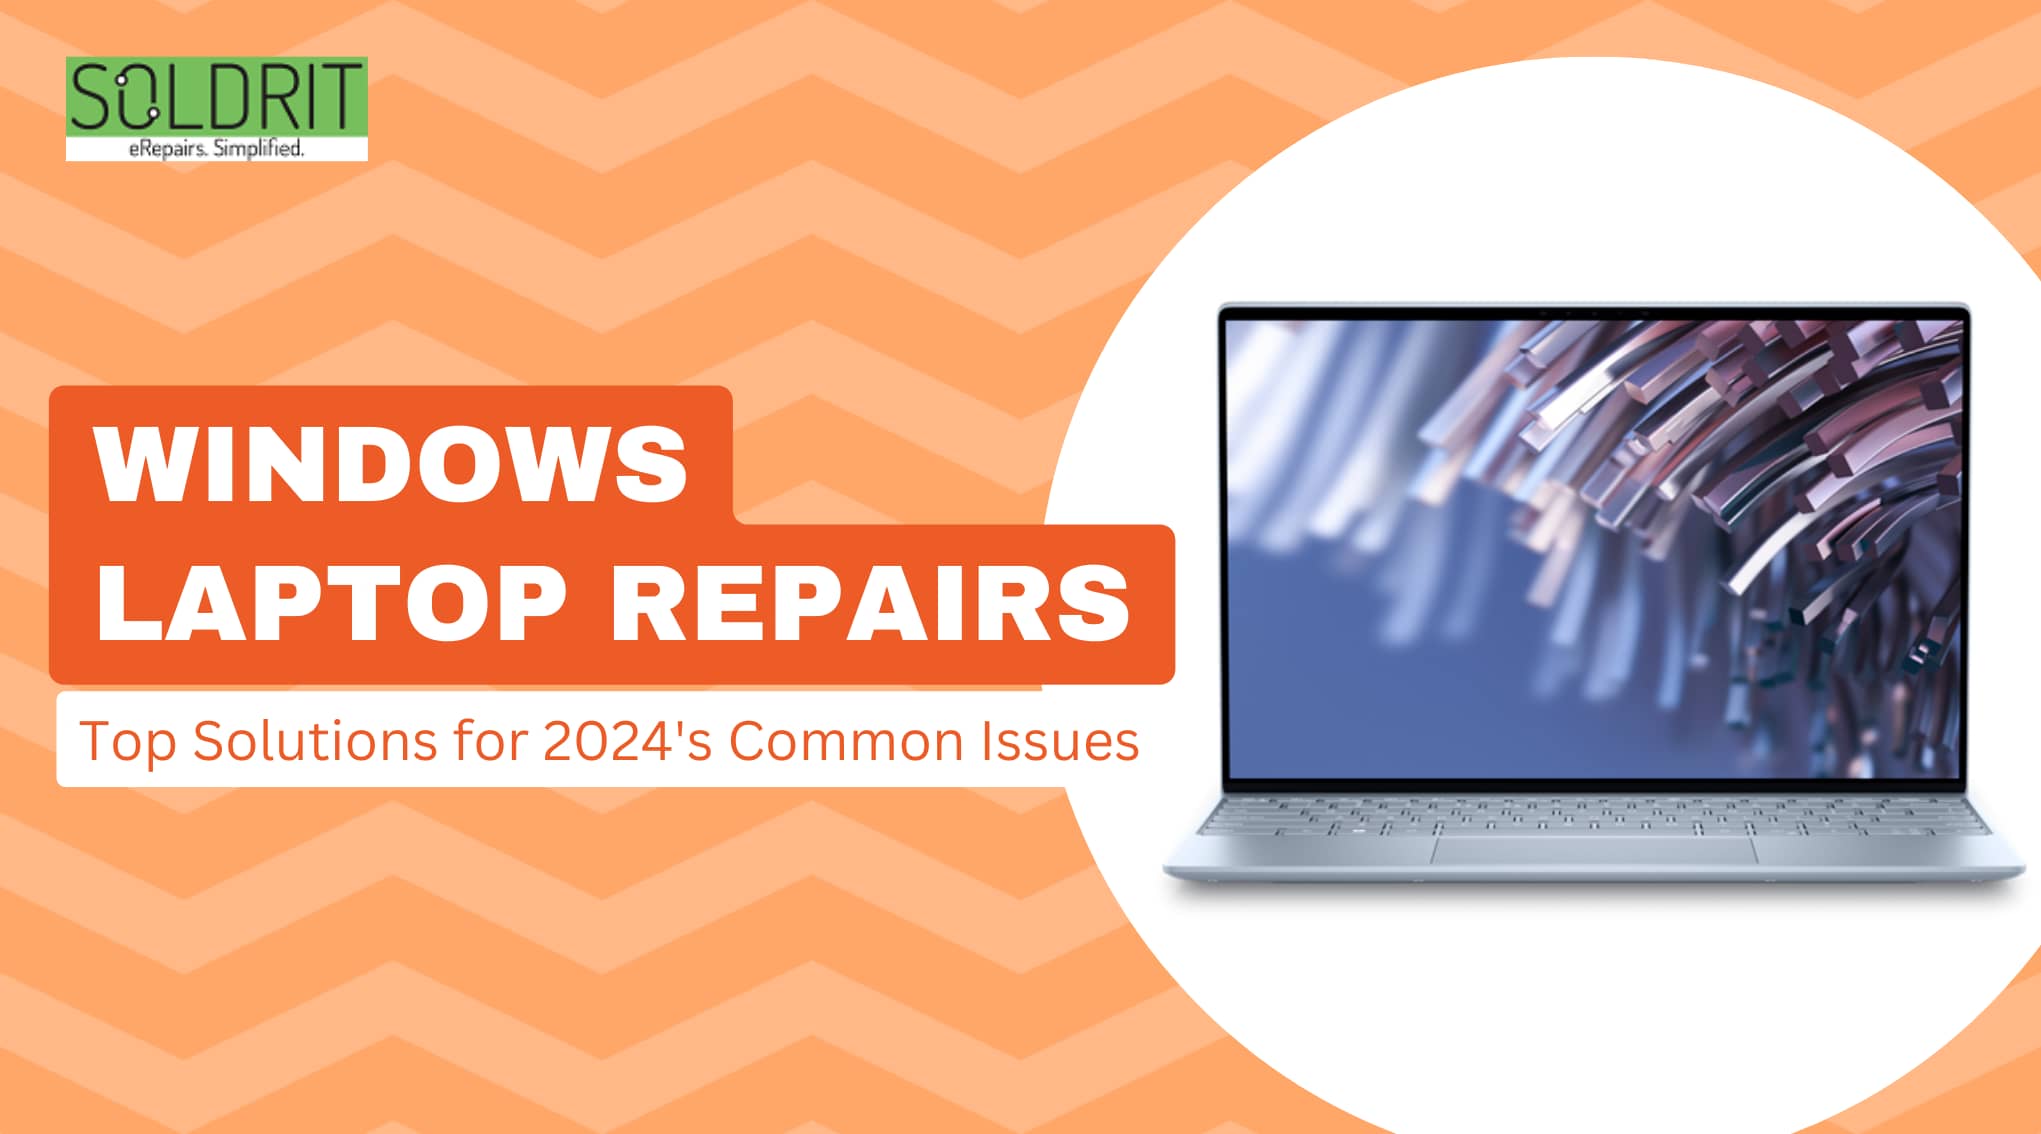 Windows Laptop Repairs Top Solutions for 2024’s Common Issues